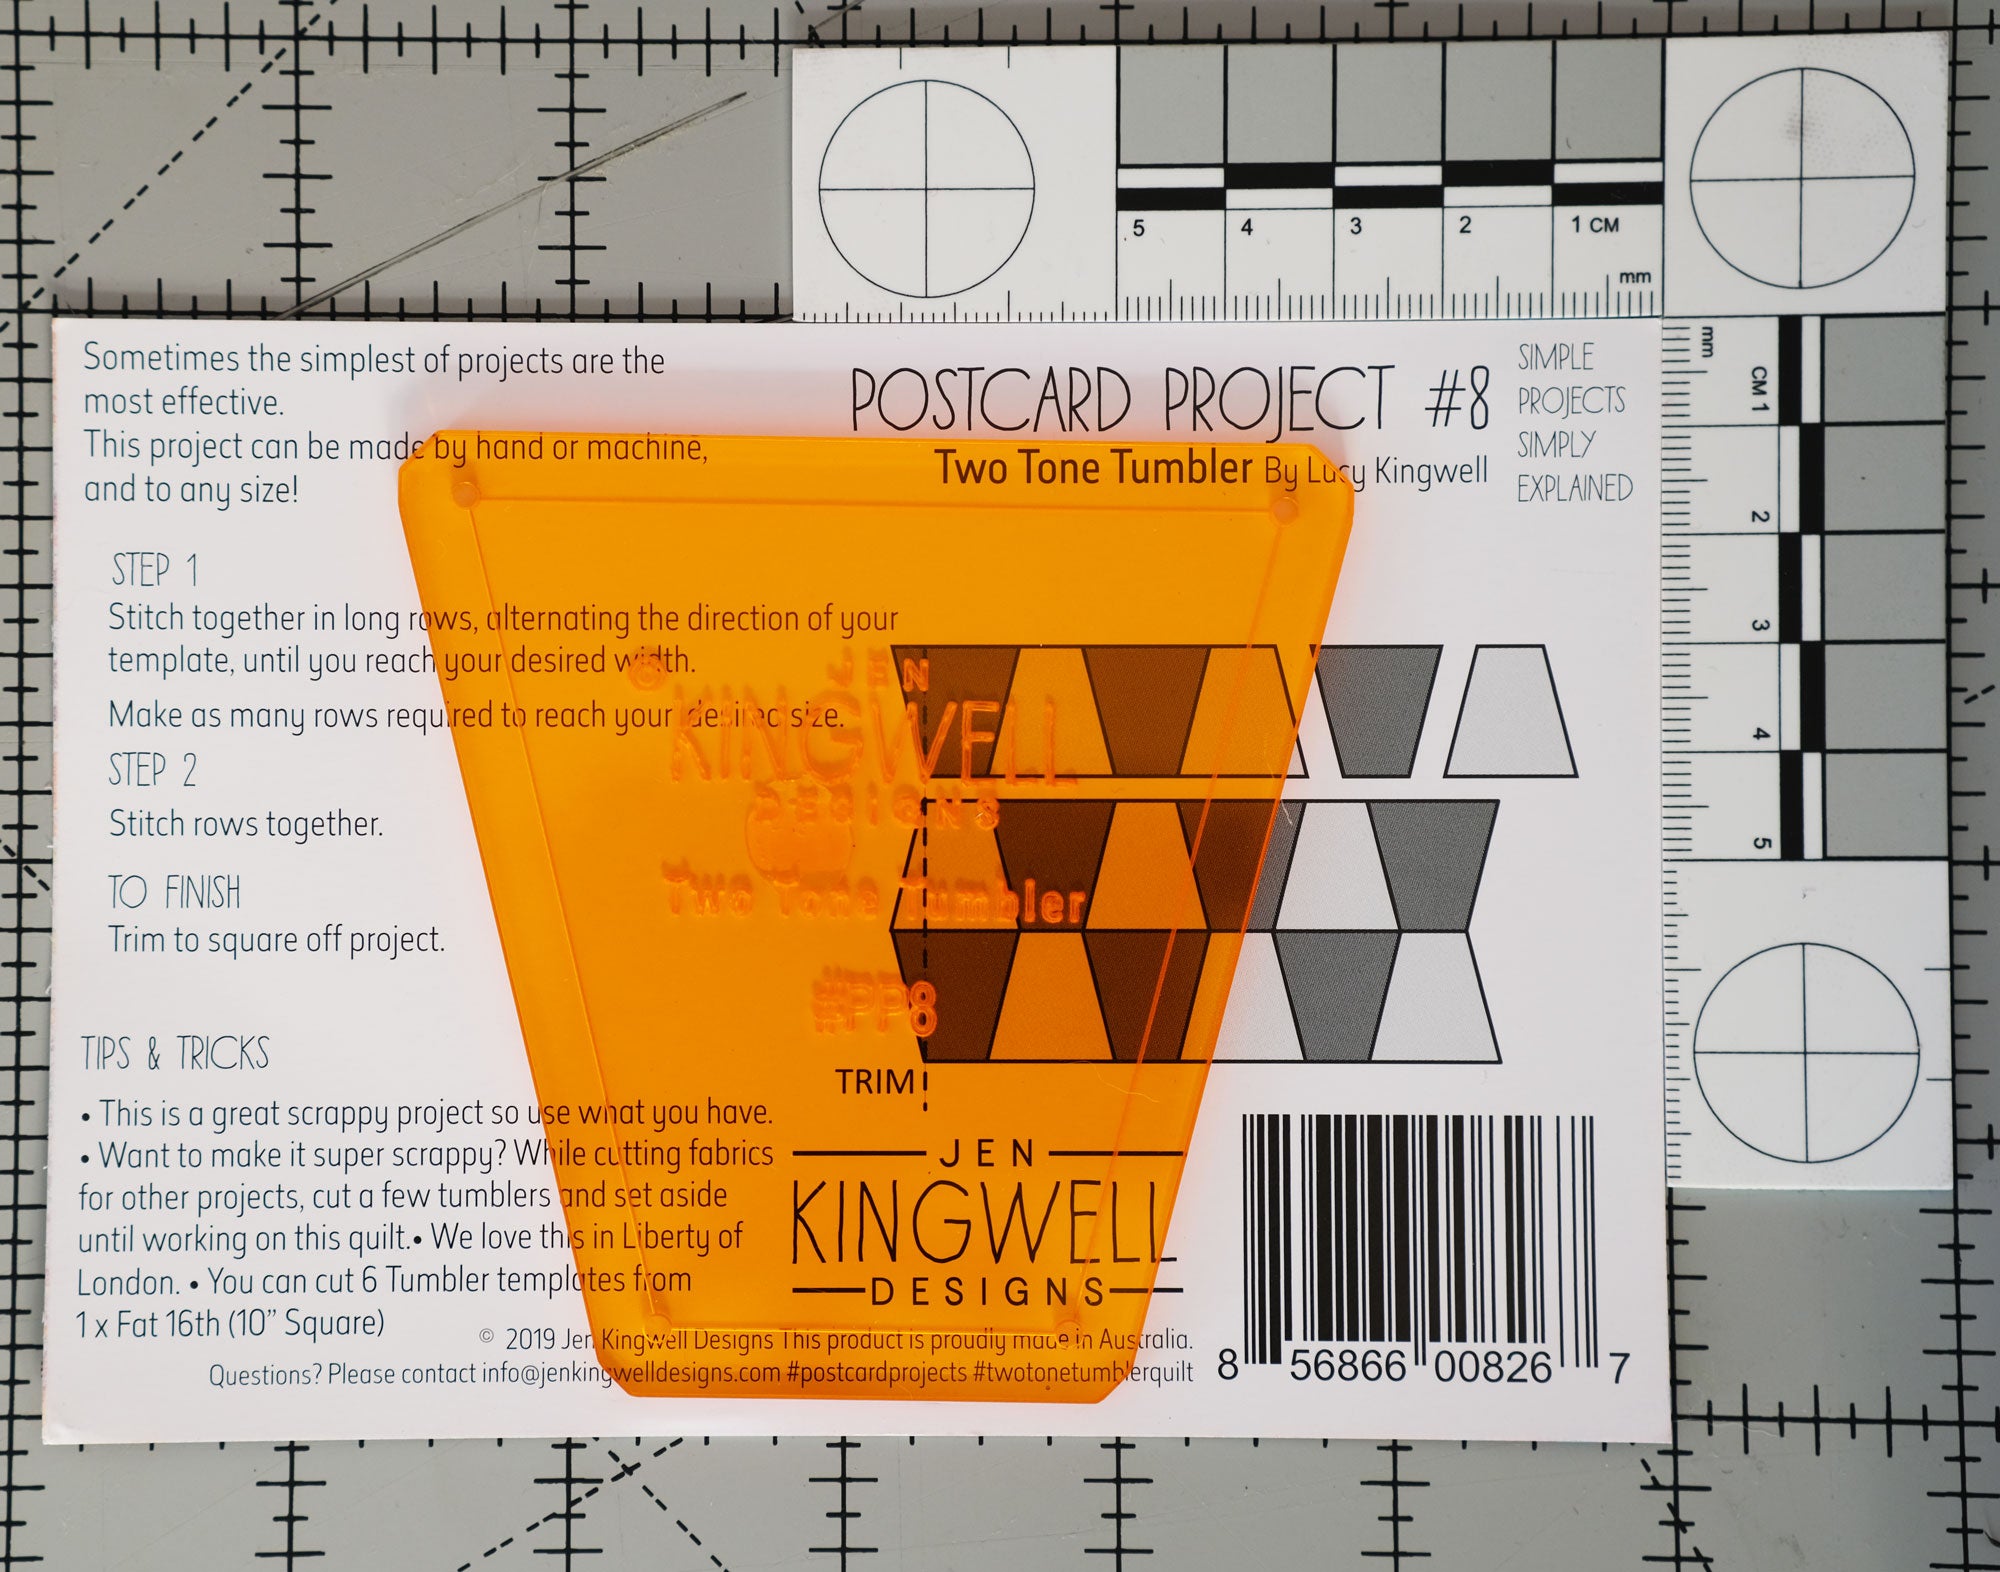 Postcard Project #08: Two Tone Tumbler from Jen Kingwell Designs